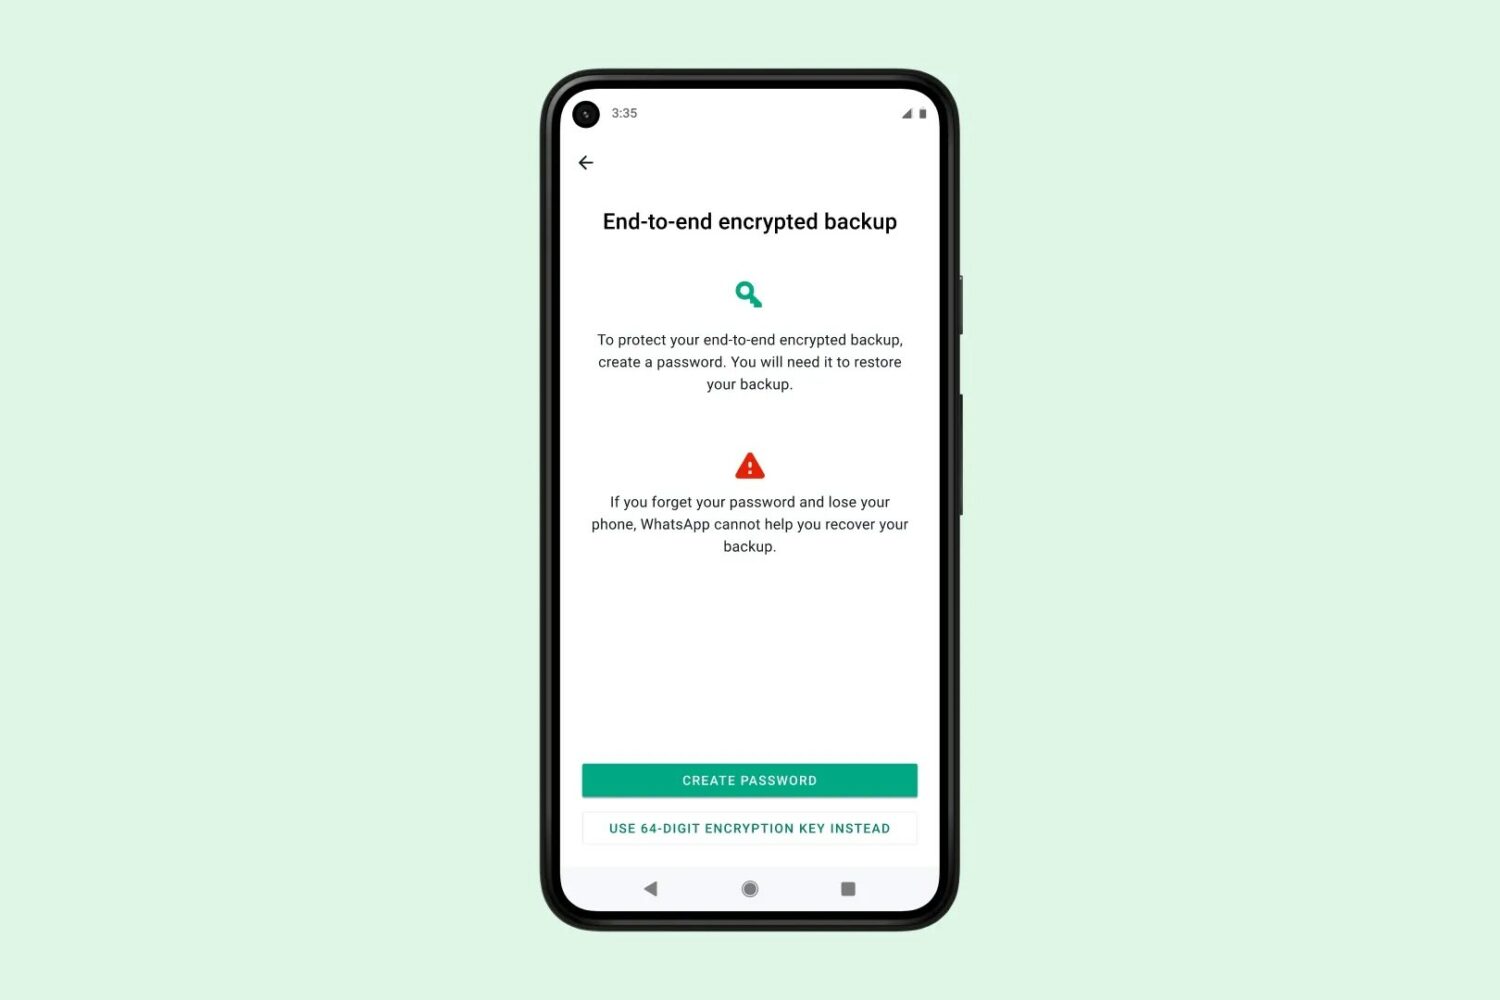 Meta's promotional image showing Android device screenshot set against a solid light-green background, with the device displaying a splash screen in WhatsApp for end-to-en encrypted backups